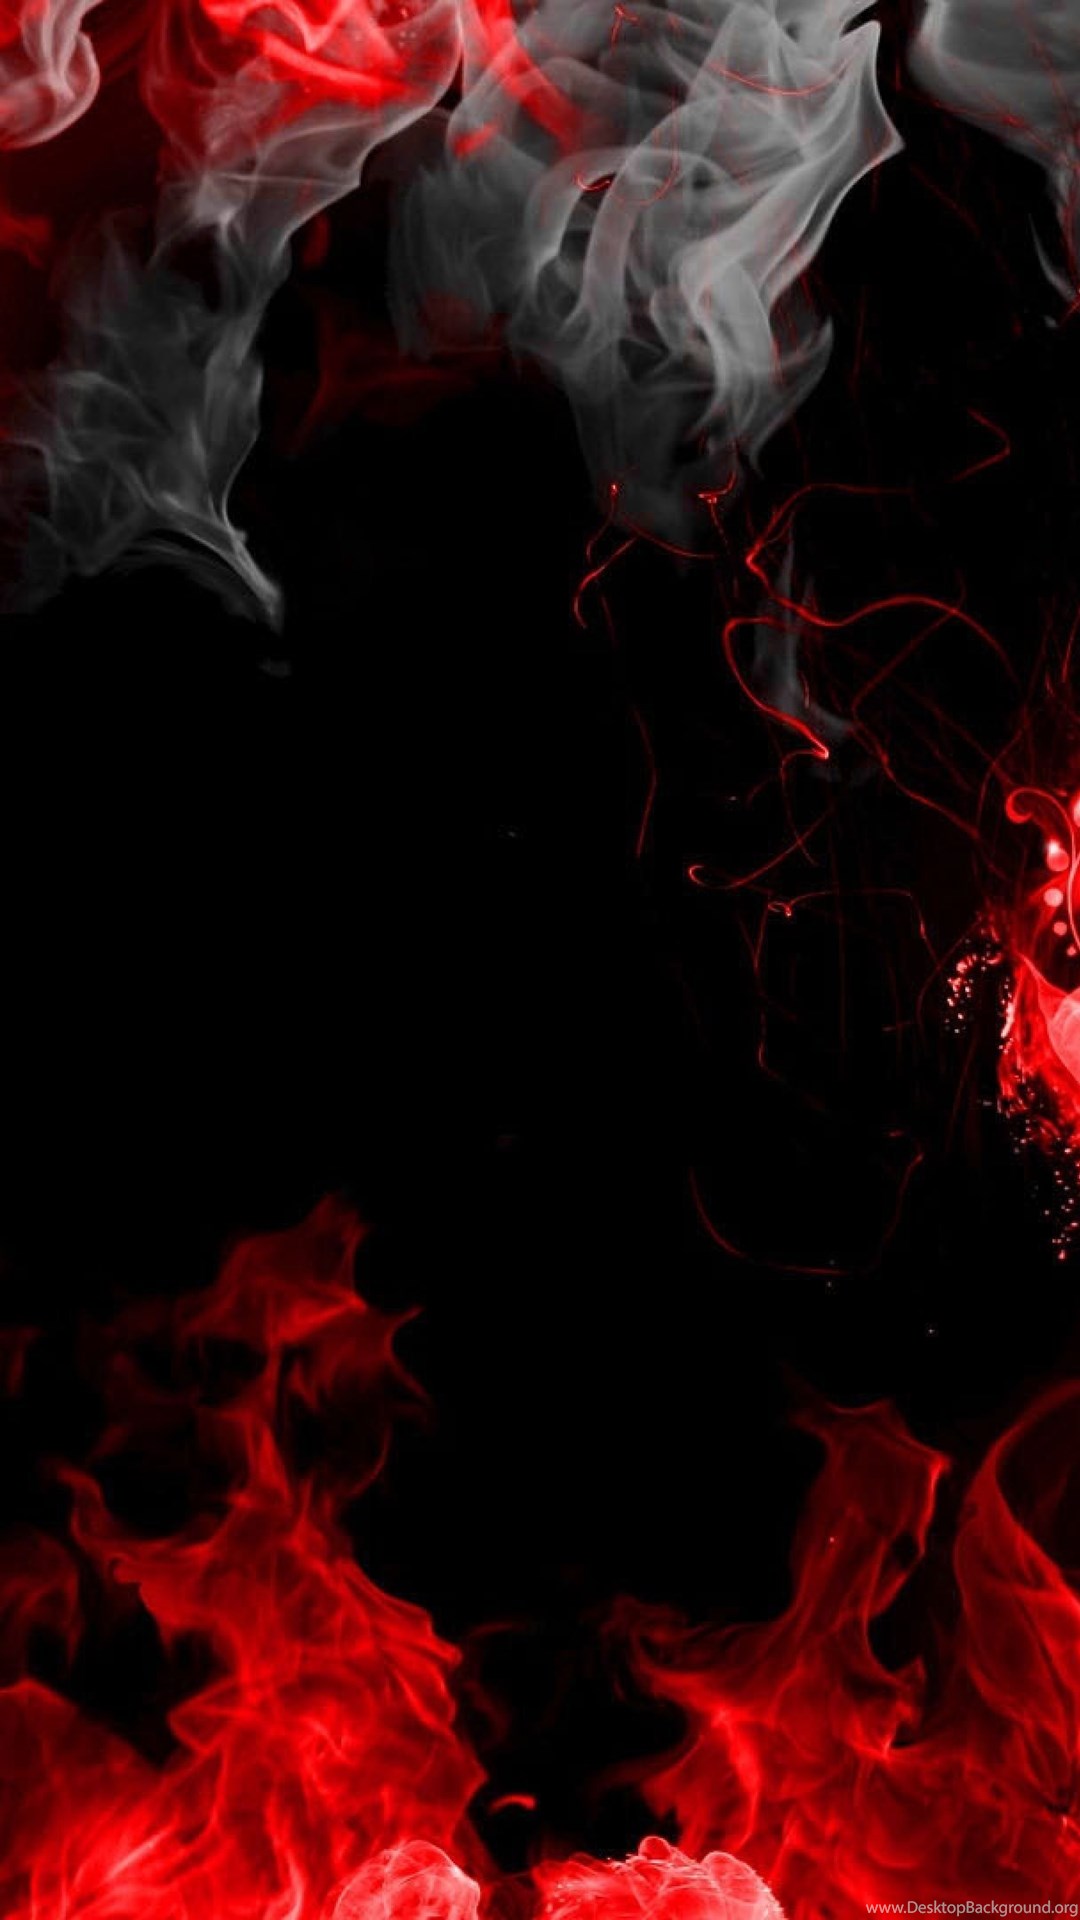 Black And Red Wallpaper 4k For Mobile Unixpaint Black And Green Wallpaper Iphone 1080x1920 Wallpaper Teahub Io